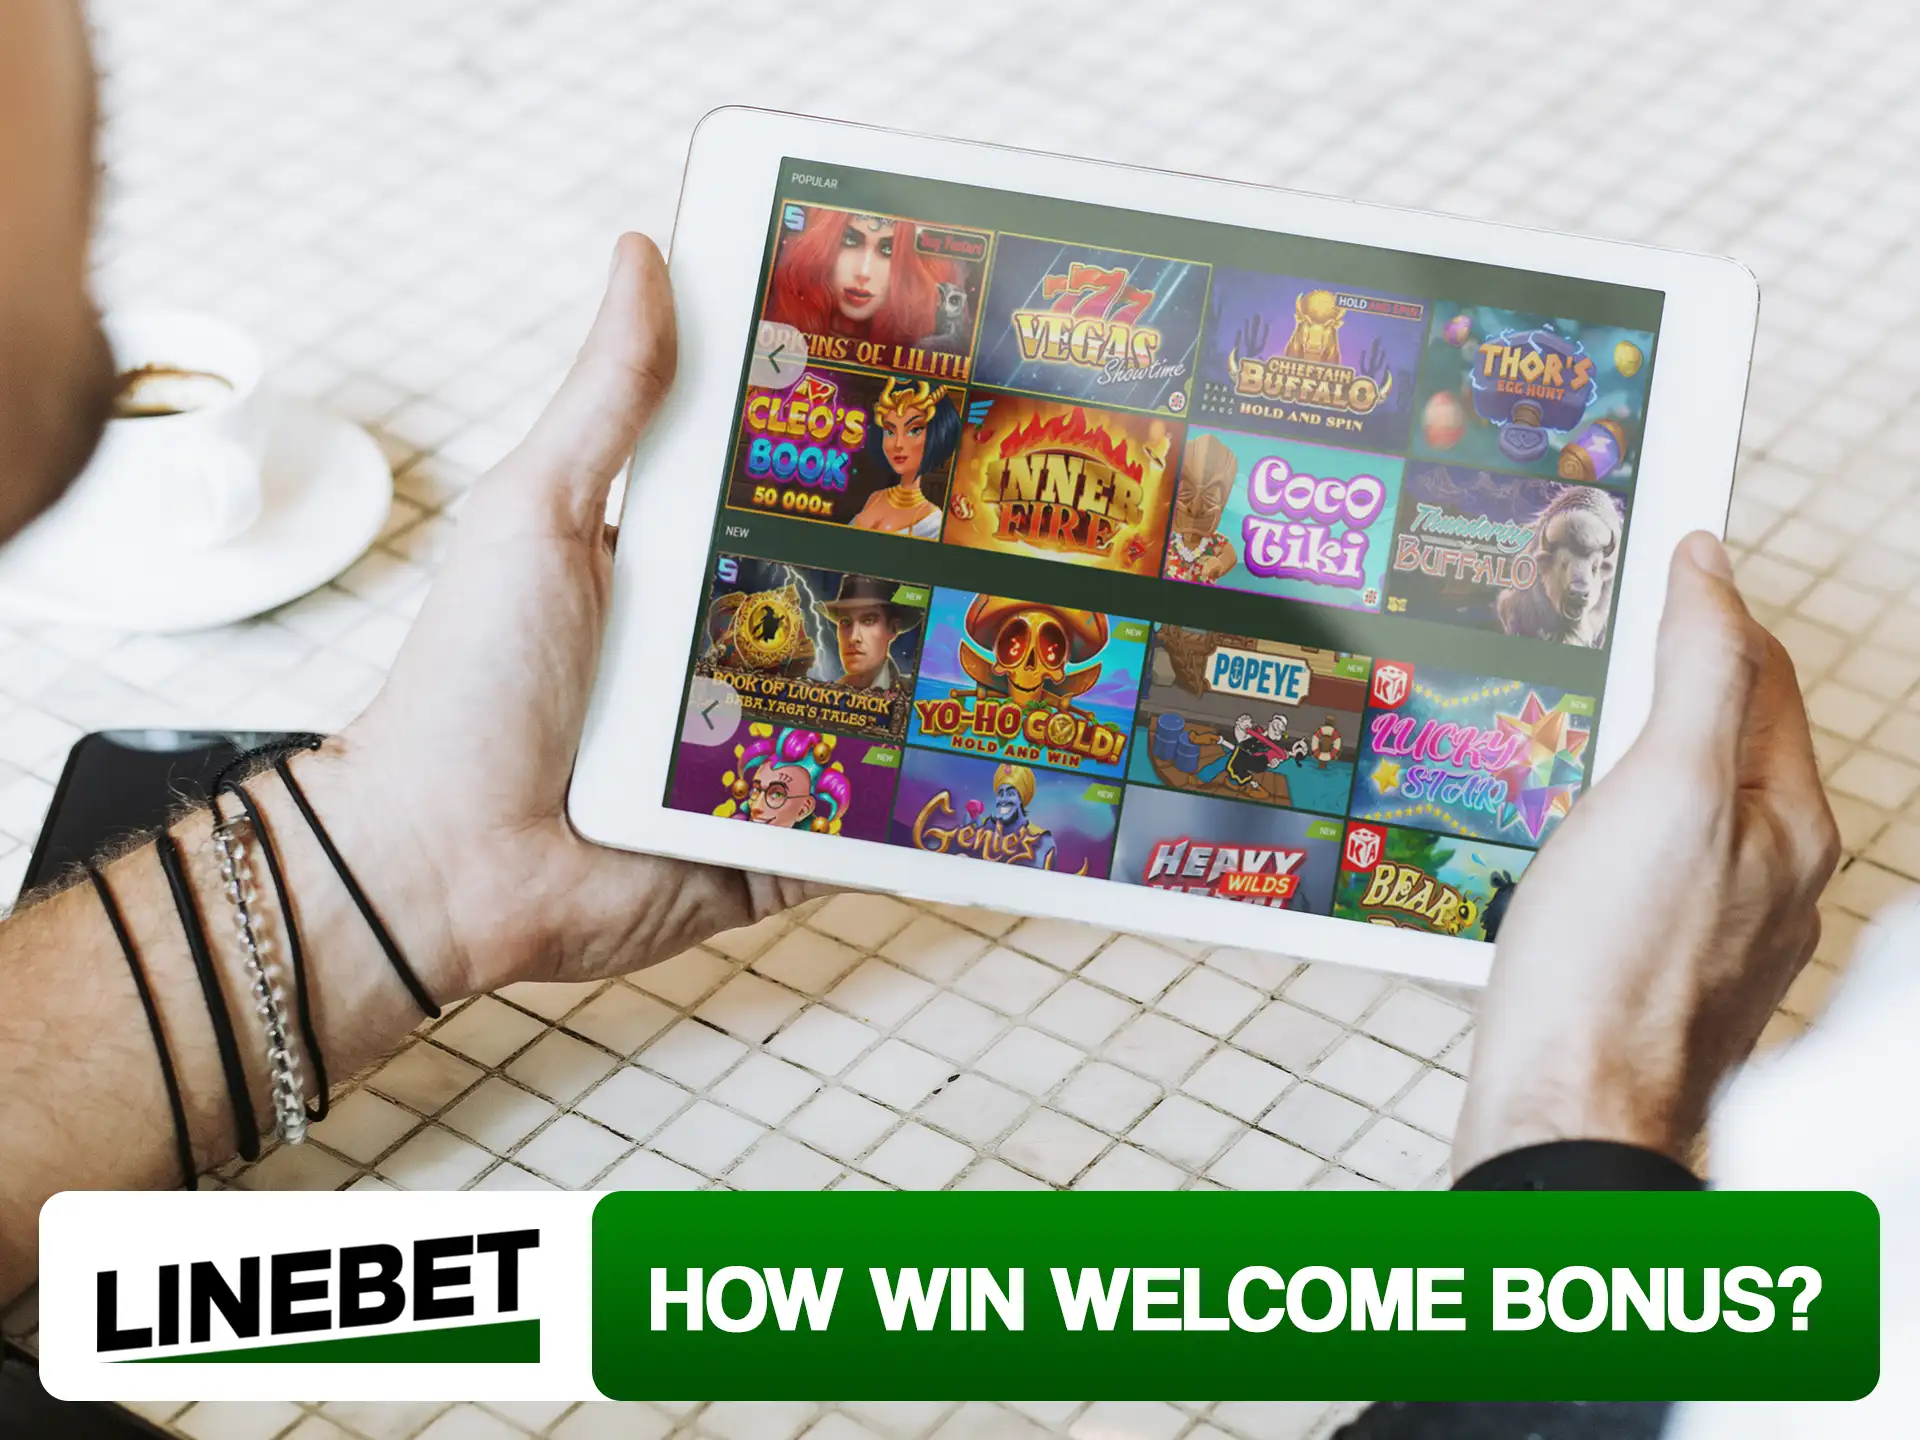 Win your Linebet bonus by betting and playing casino.